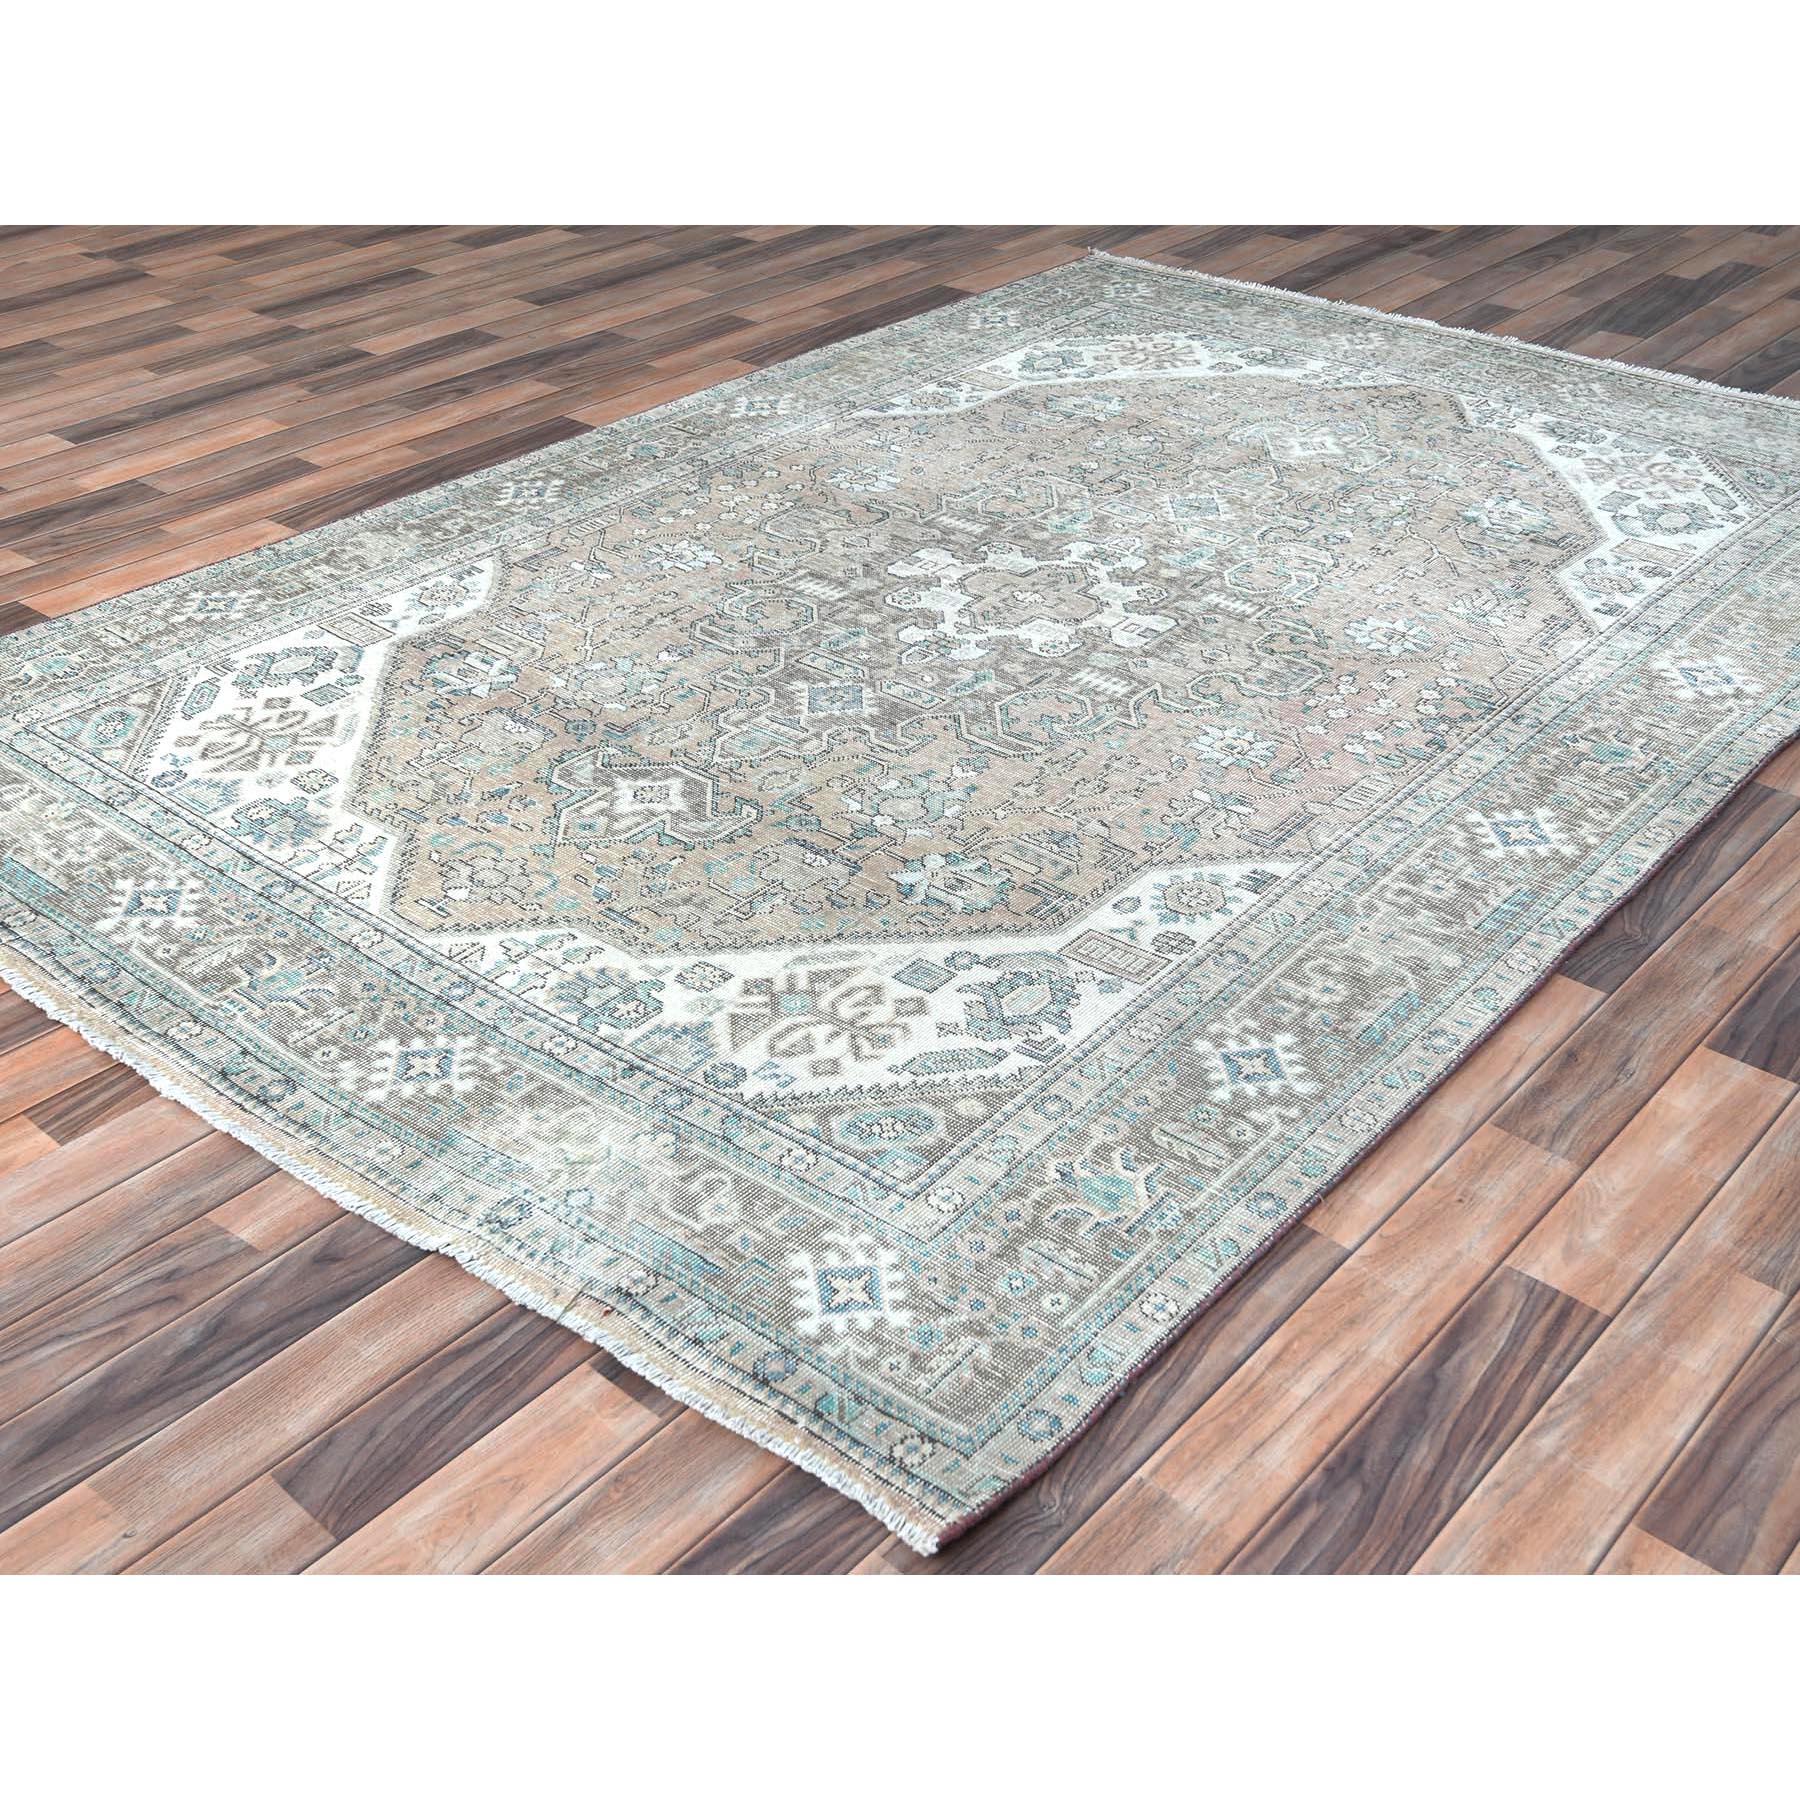 Mocha Brown Hand Knotted Worn Wool Distressed Look Vintage Persian Tabriz Rug In Good Condition For Sale In Carlstadt, NJ